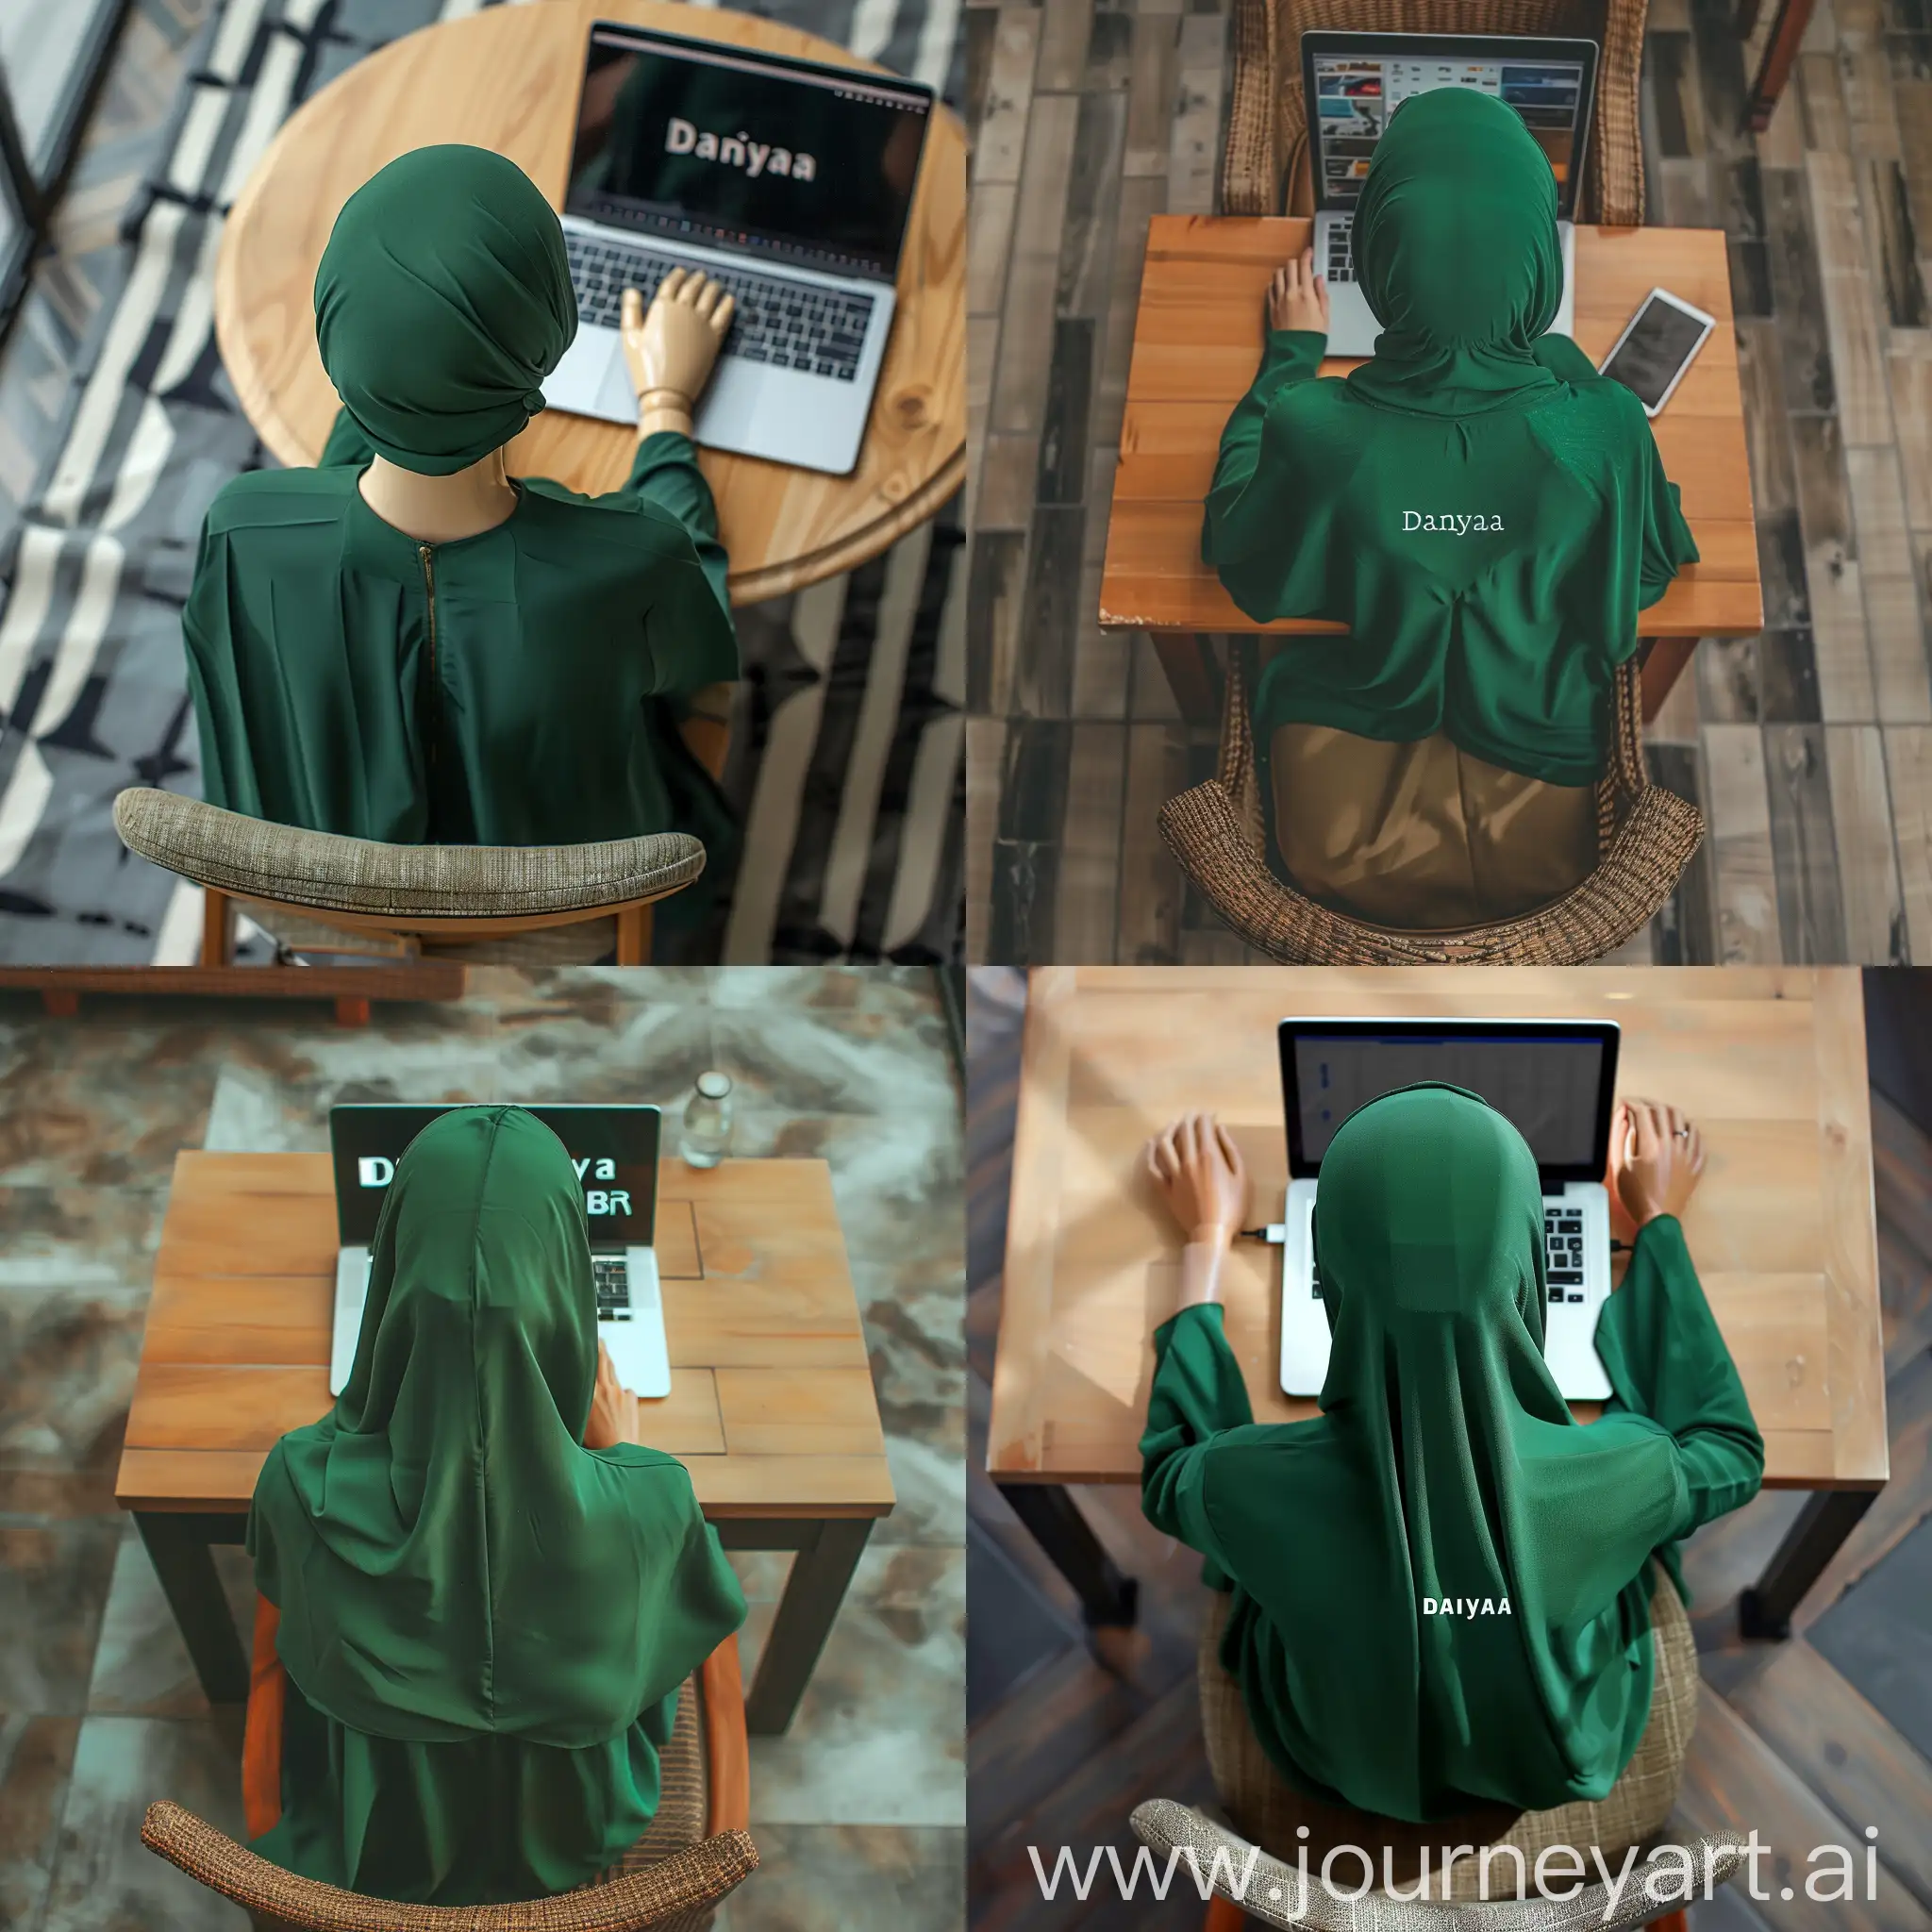 Faceless-Female-Mannequin-in-Green-Abaya-Working-on-Laptop-with-Daniya-Displayed